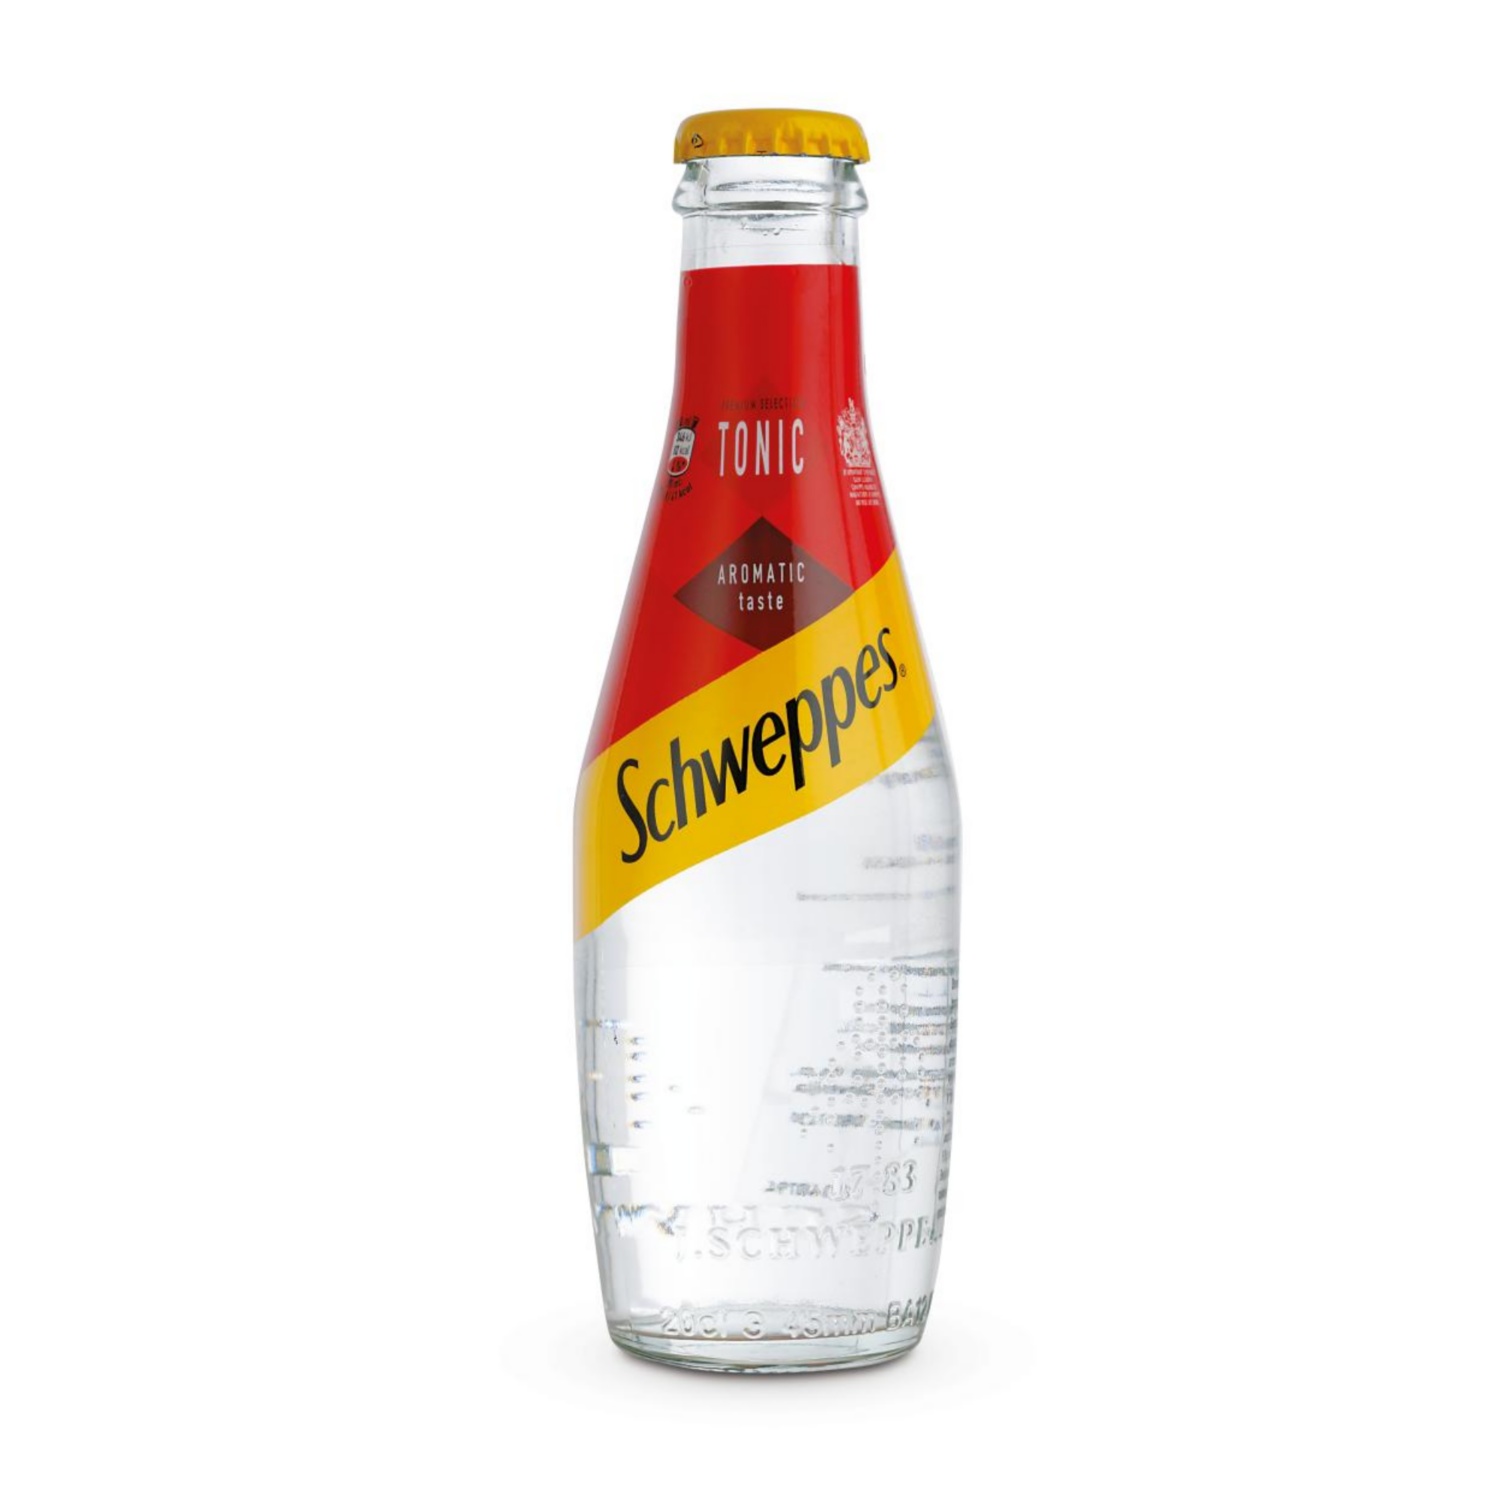 SCHWEPPES Tonic water Aromatic